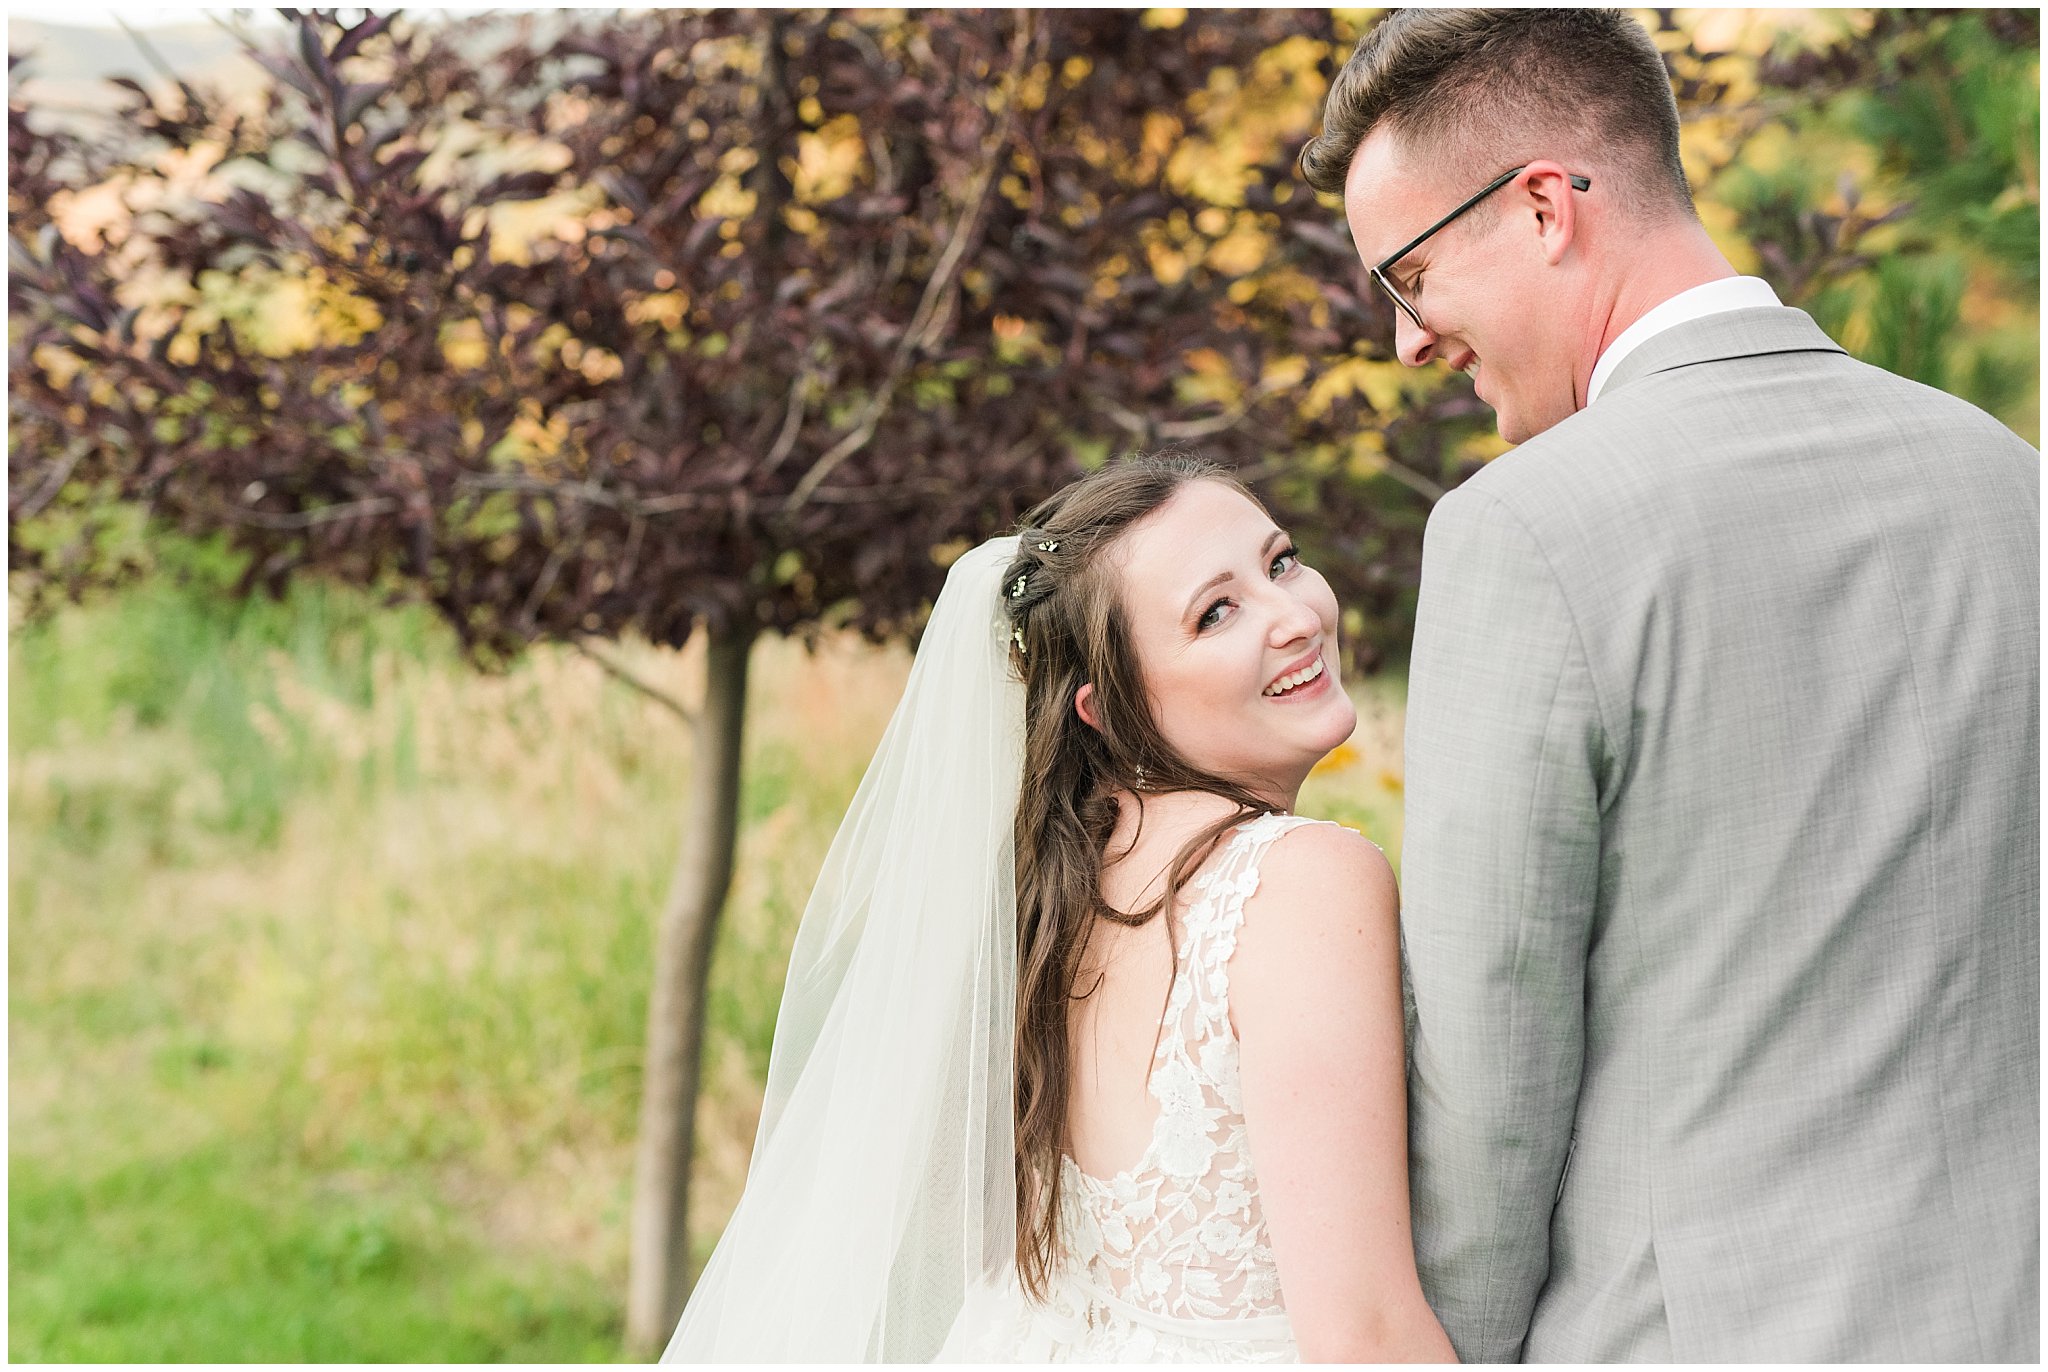 Bride and groom portraits | Oak Hills Utah Dusty Rose and Gray Summer Wedding | Jessie and Dallin Photography